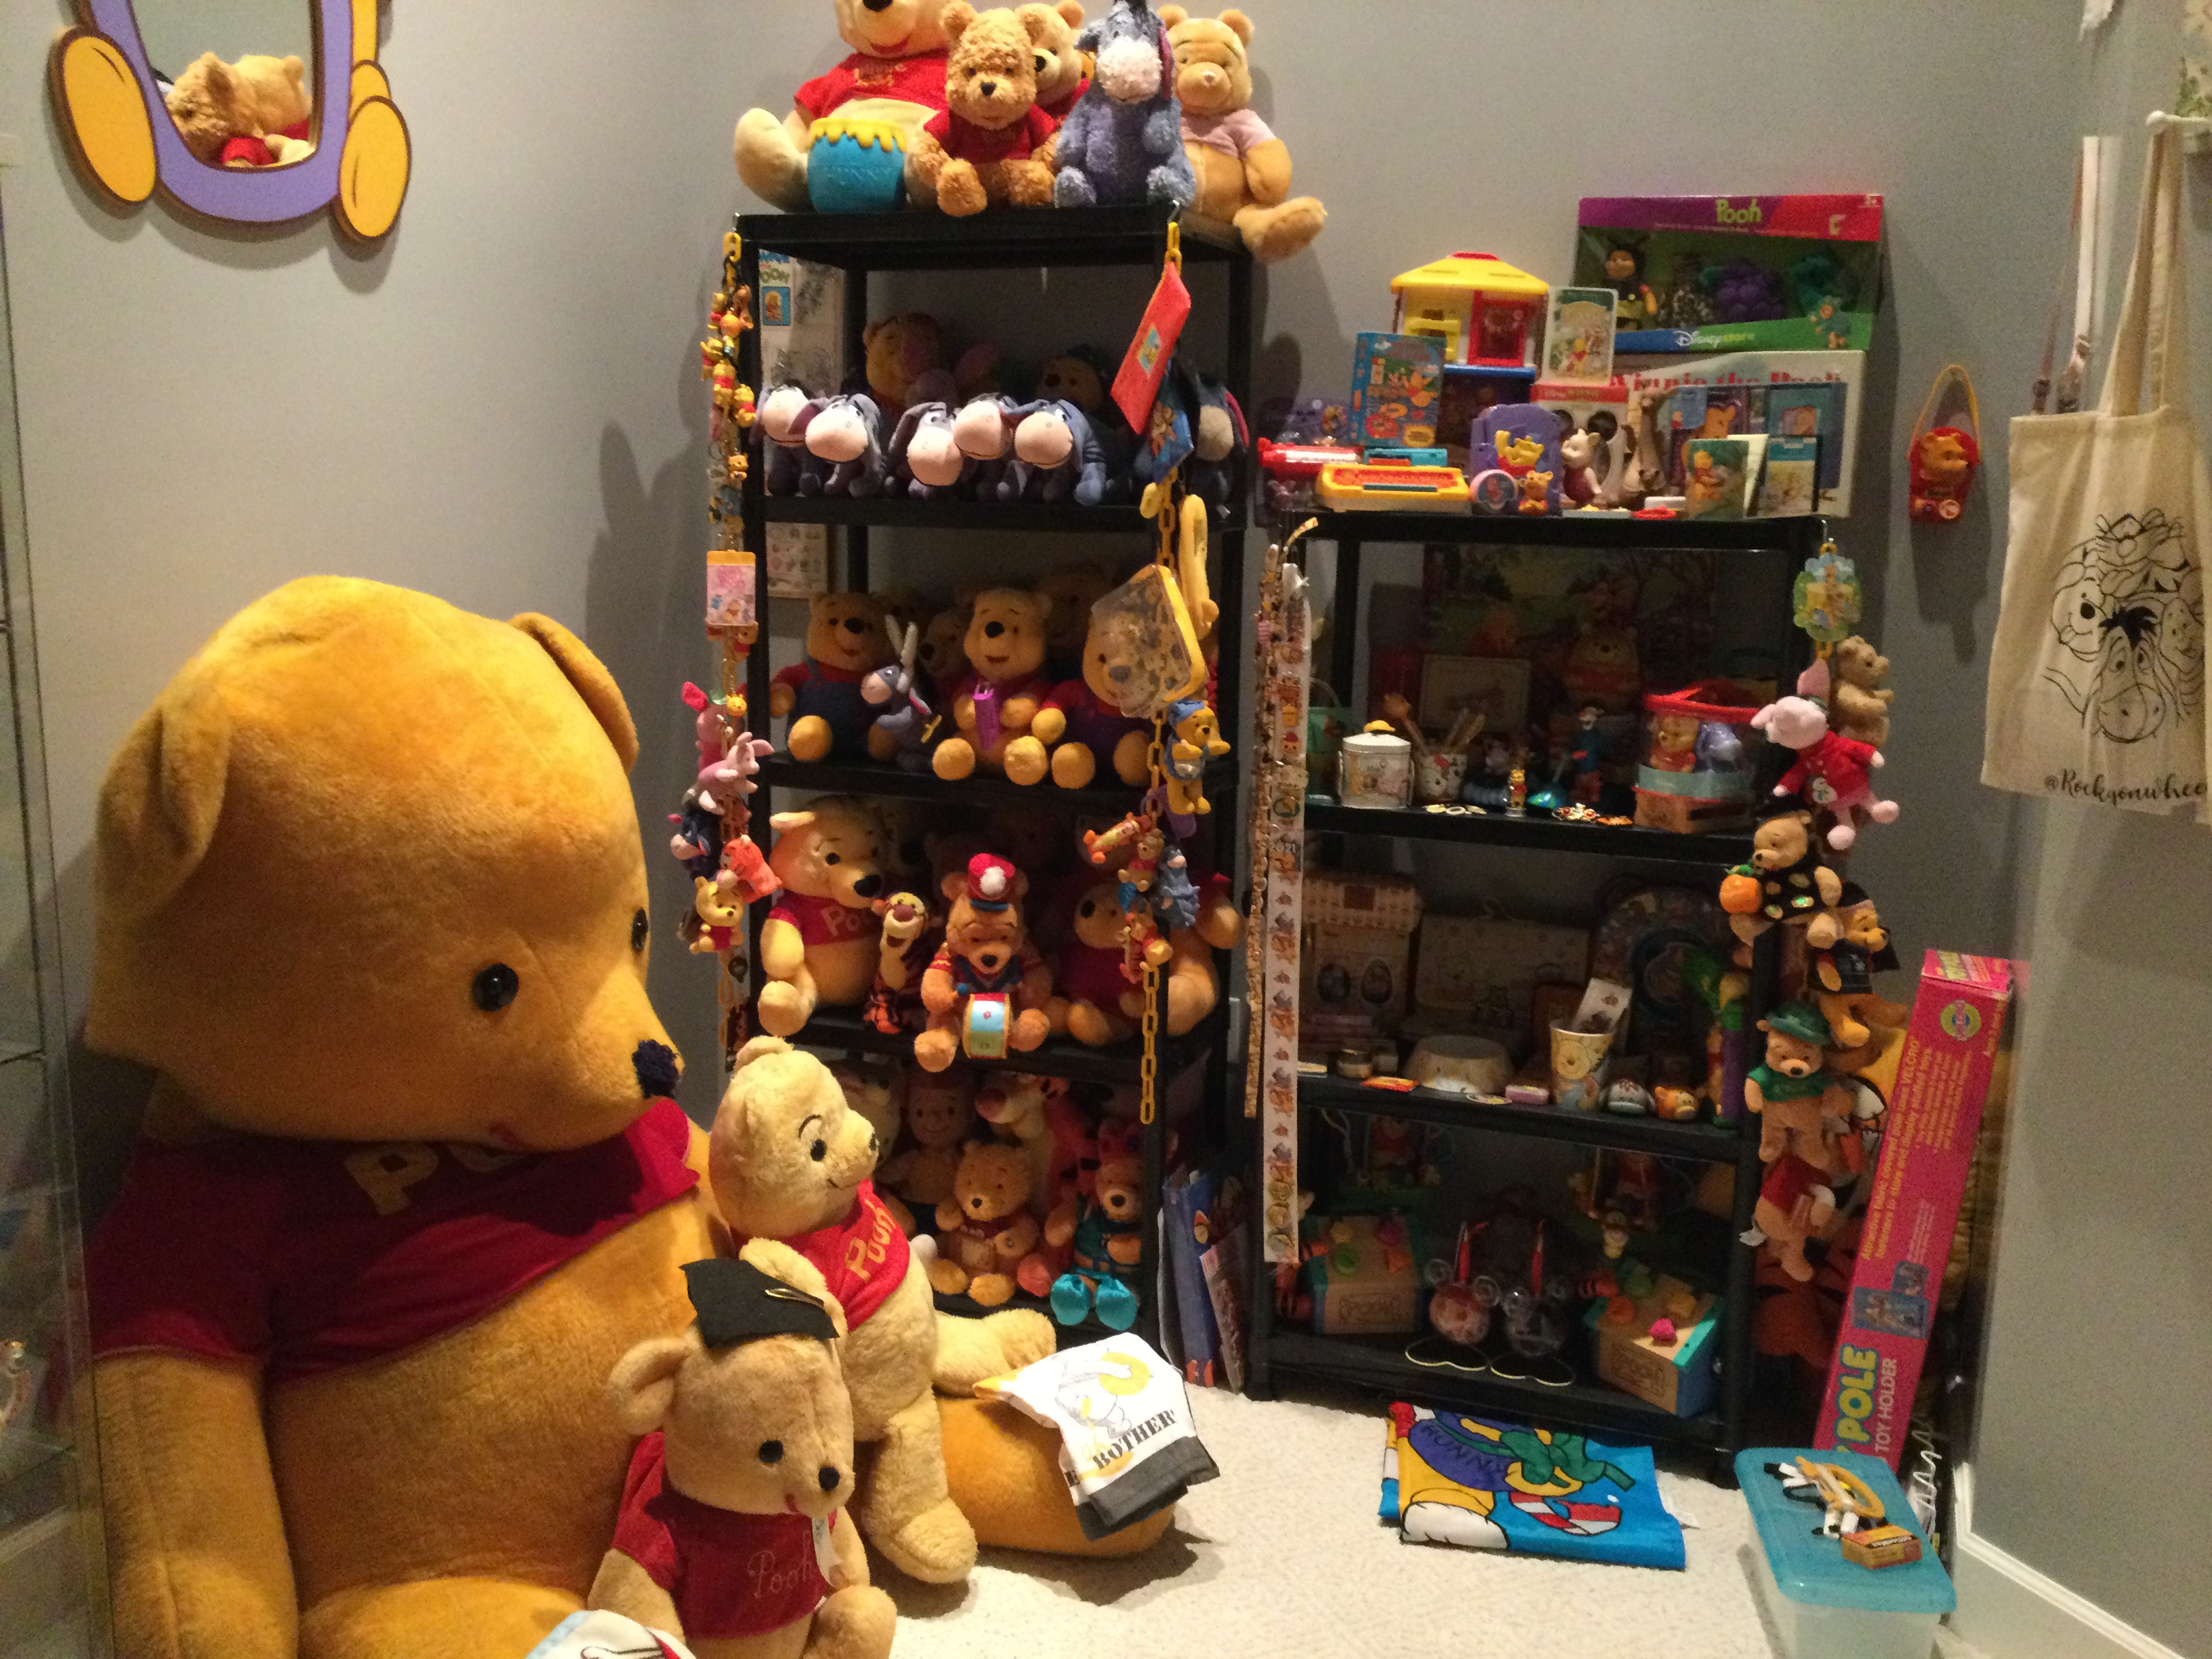 Deb Hoffmann's record-breaking Winnie the Pooh collection is split between her Winter Haven and Wisconsin residences. These items are at her Florida home. (Courtesy Deb Hoffmann / Courtesy photo)